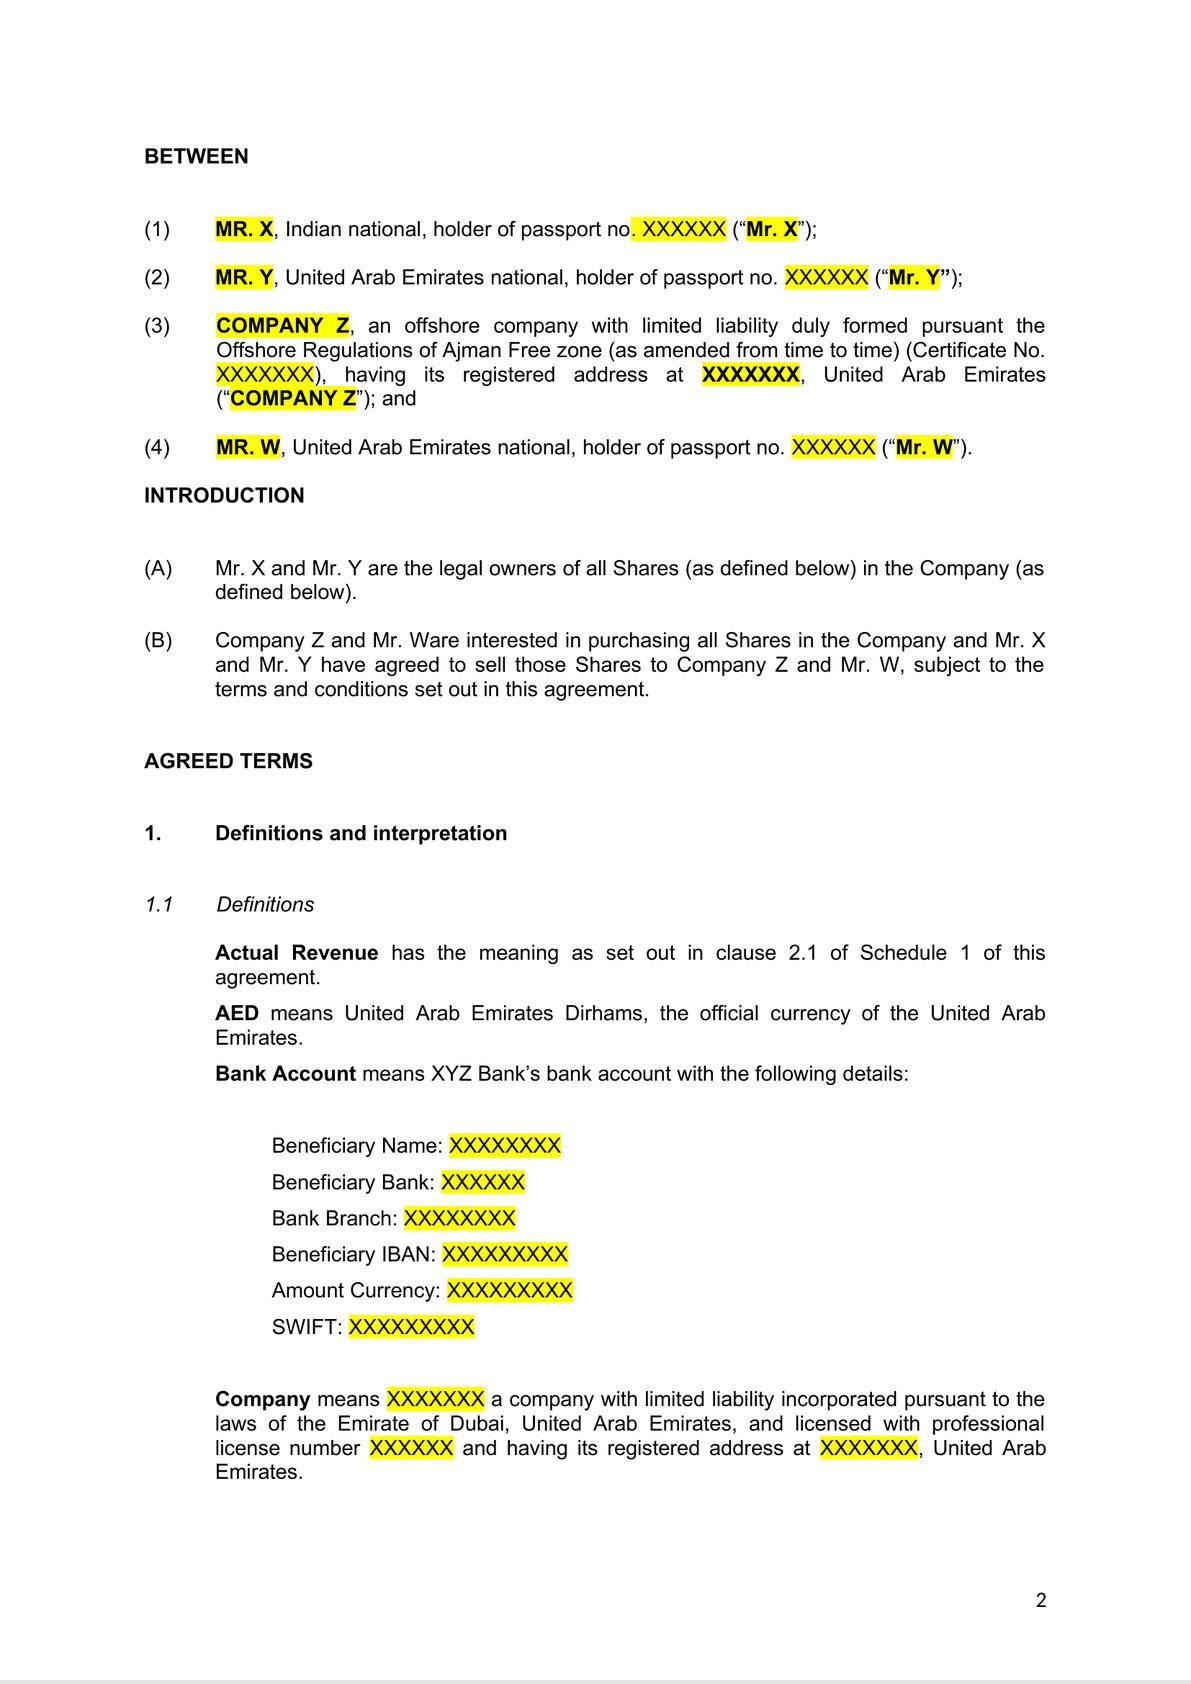 Share Purchase Agreement -1